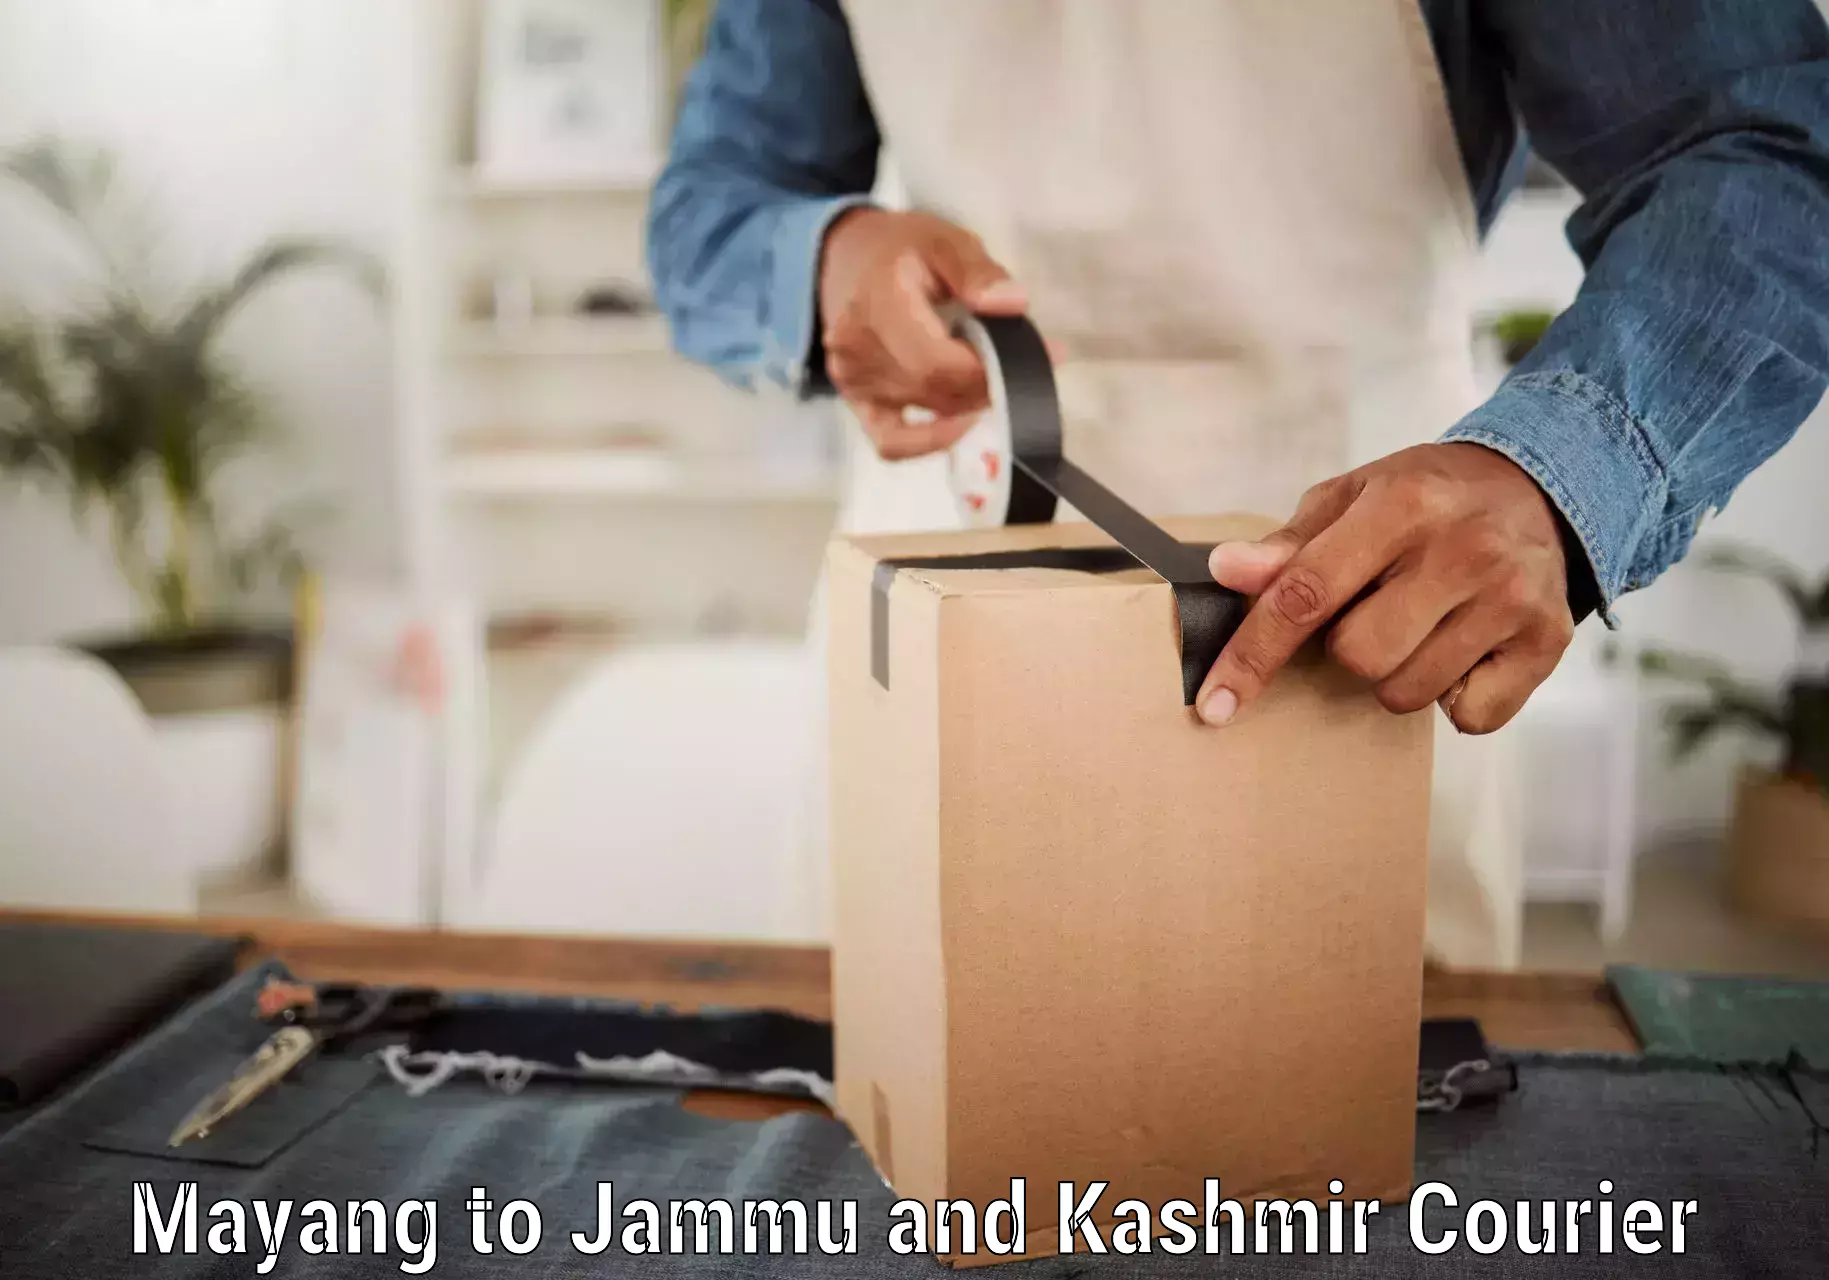 24-hour delivery options Mayang to Jammu and Kashmir